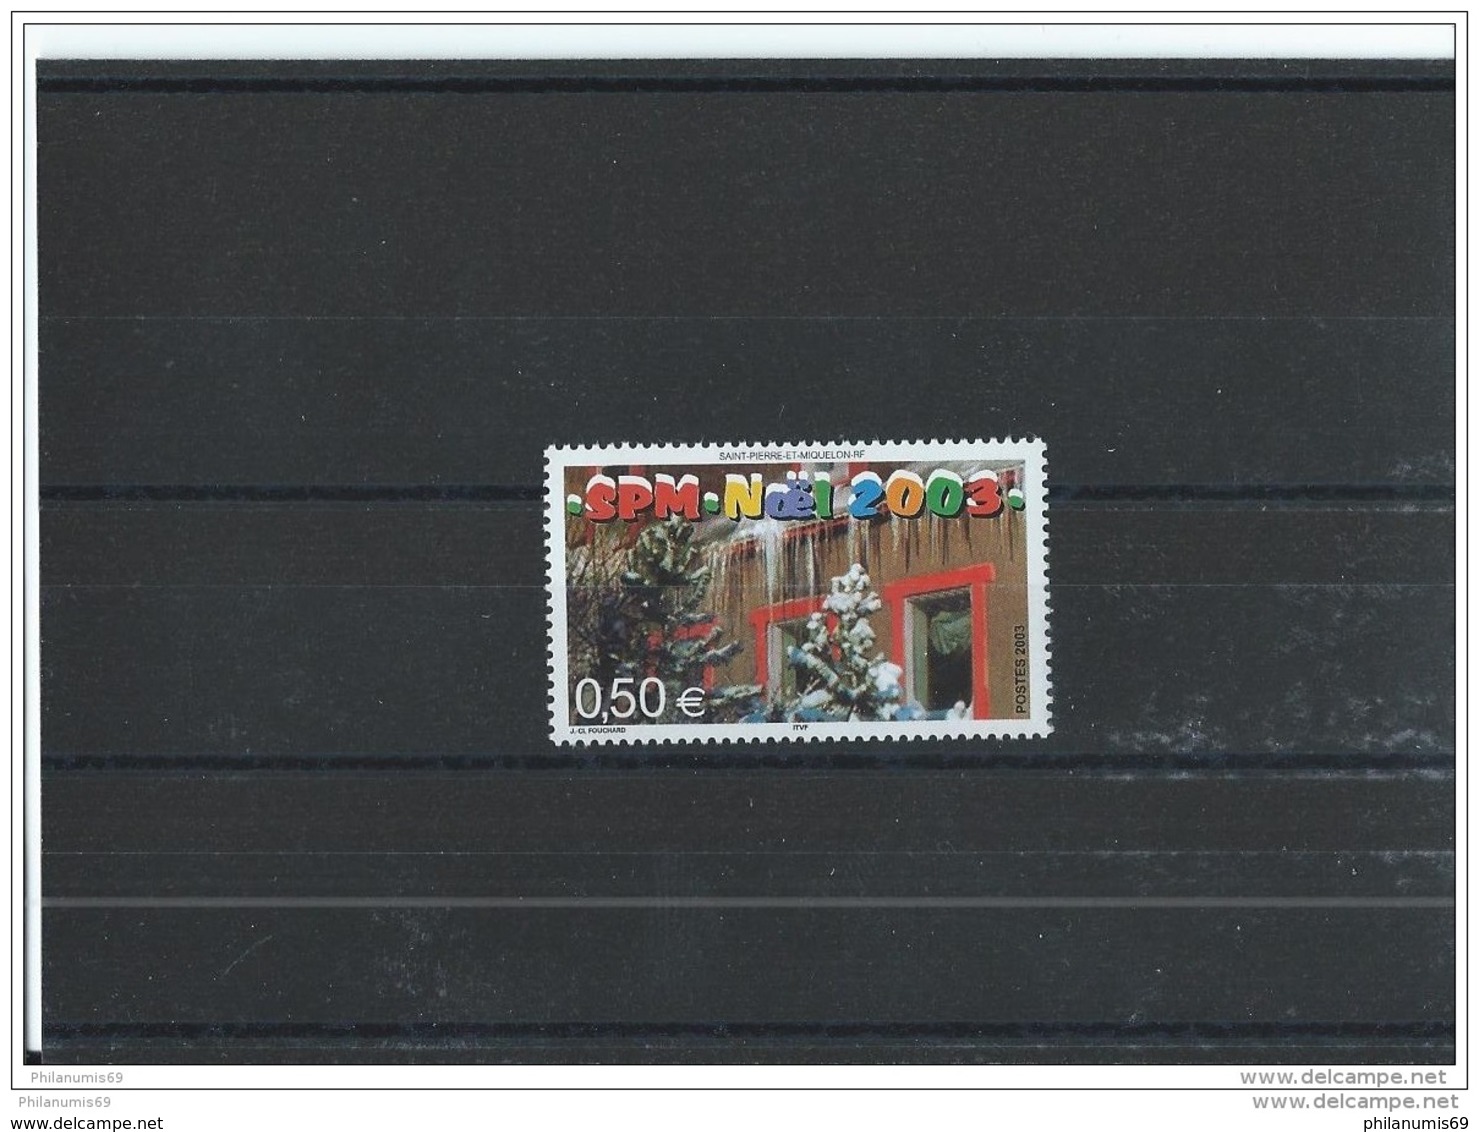 SPM 2003 - YT N° 809 NEUF SANS CHARNIERE ** (MNH) GOMME D'ORIGINE LUXE - Unused Stamps